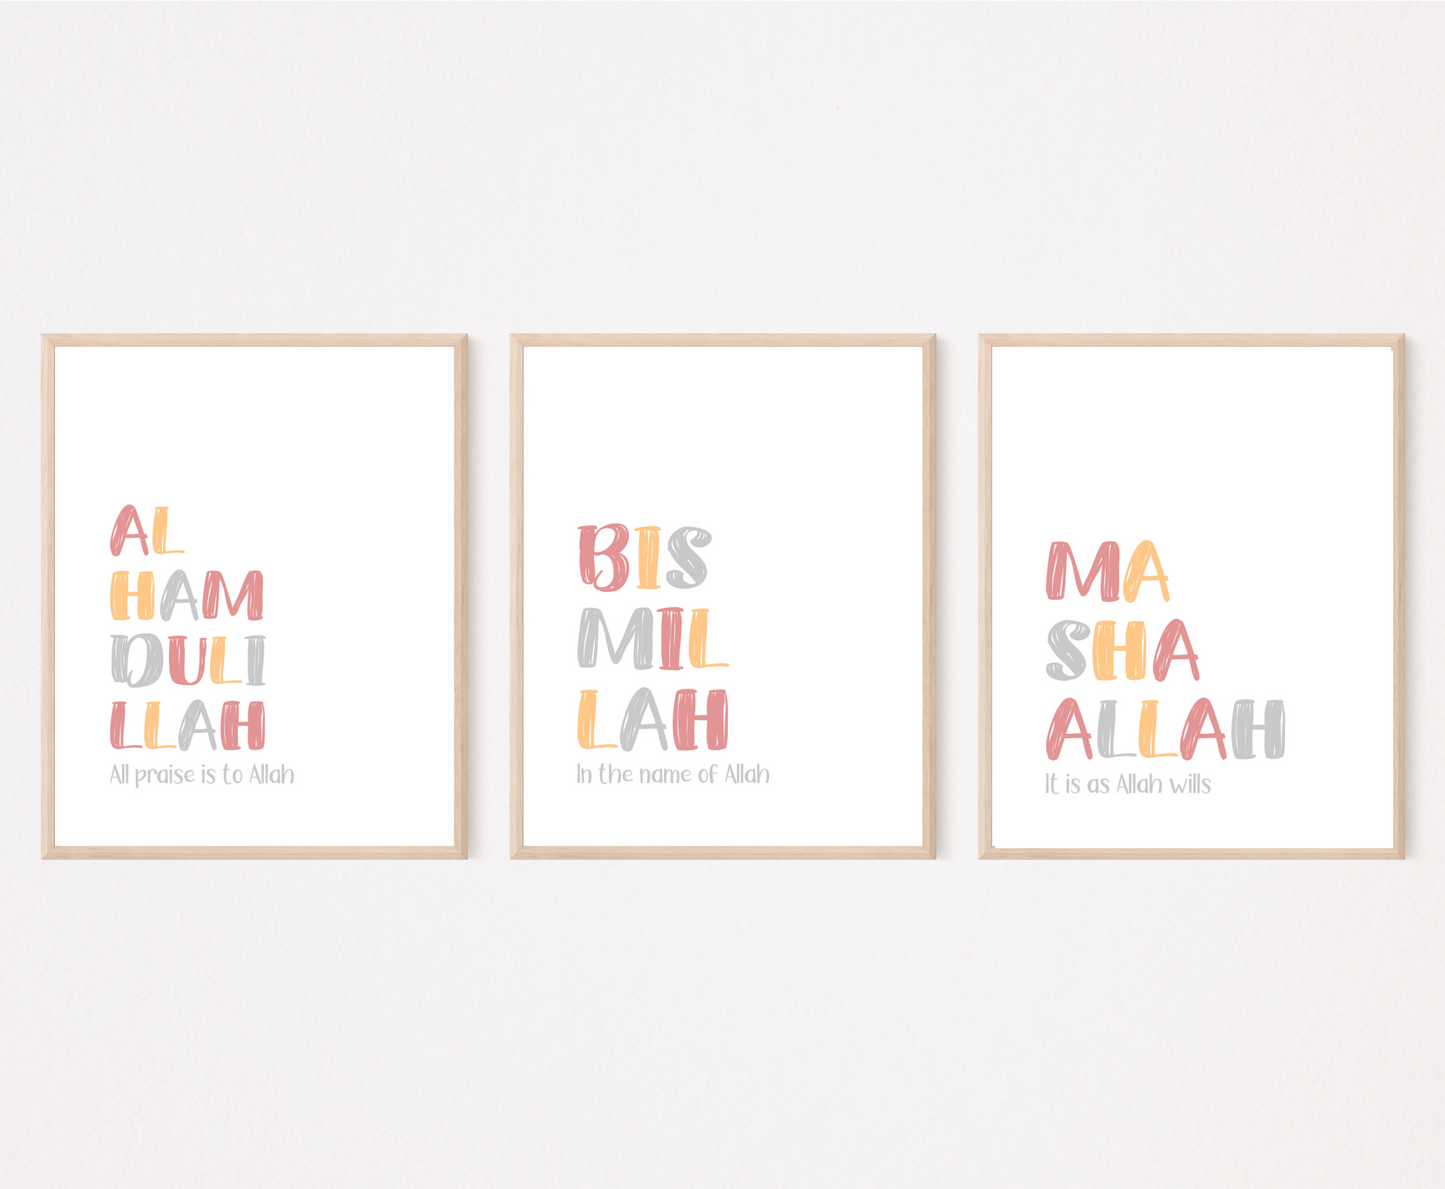 An image showing three digital print graphics for pieces of writing written in multi-colored letters with a white background. The first one shows a graphic of “Alhamdulillah, all praise to Allah”. The second one is for “Bismillah, in the name of Allah”. The last one is for “Mashallah, it is as Allah wills”.